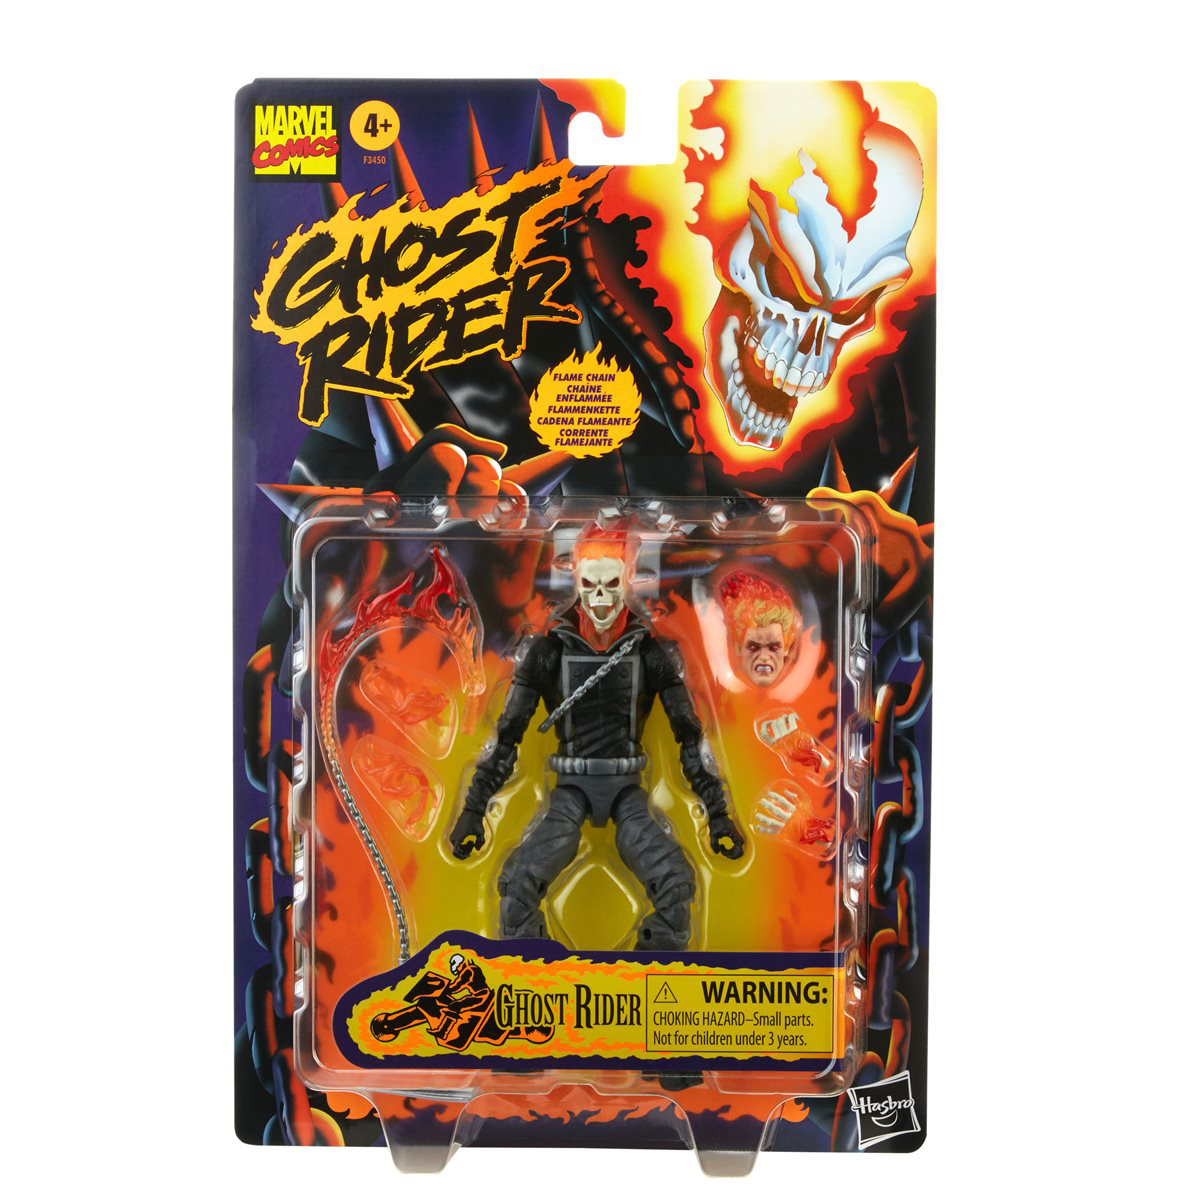 ghost-rider-marvel-legends-retro-action-figure-packaging-1